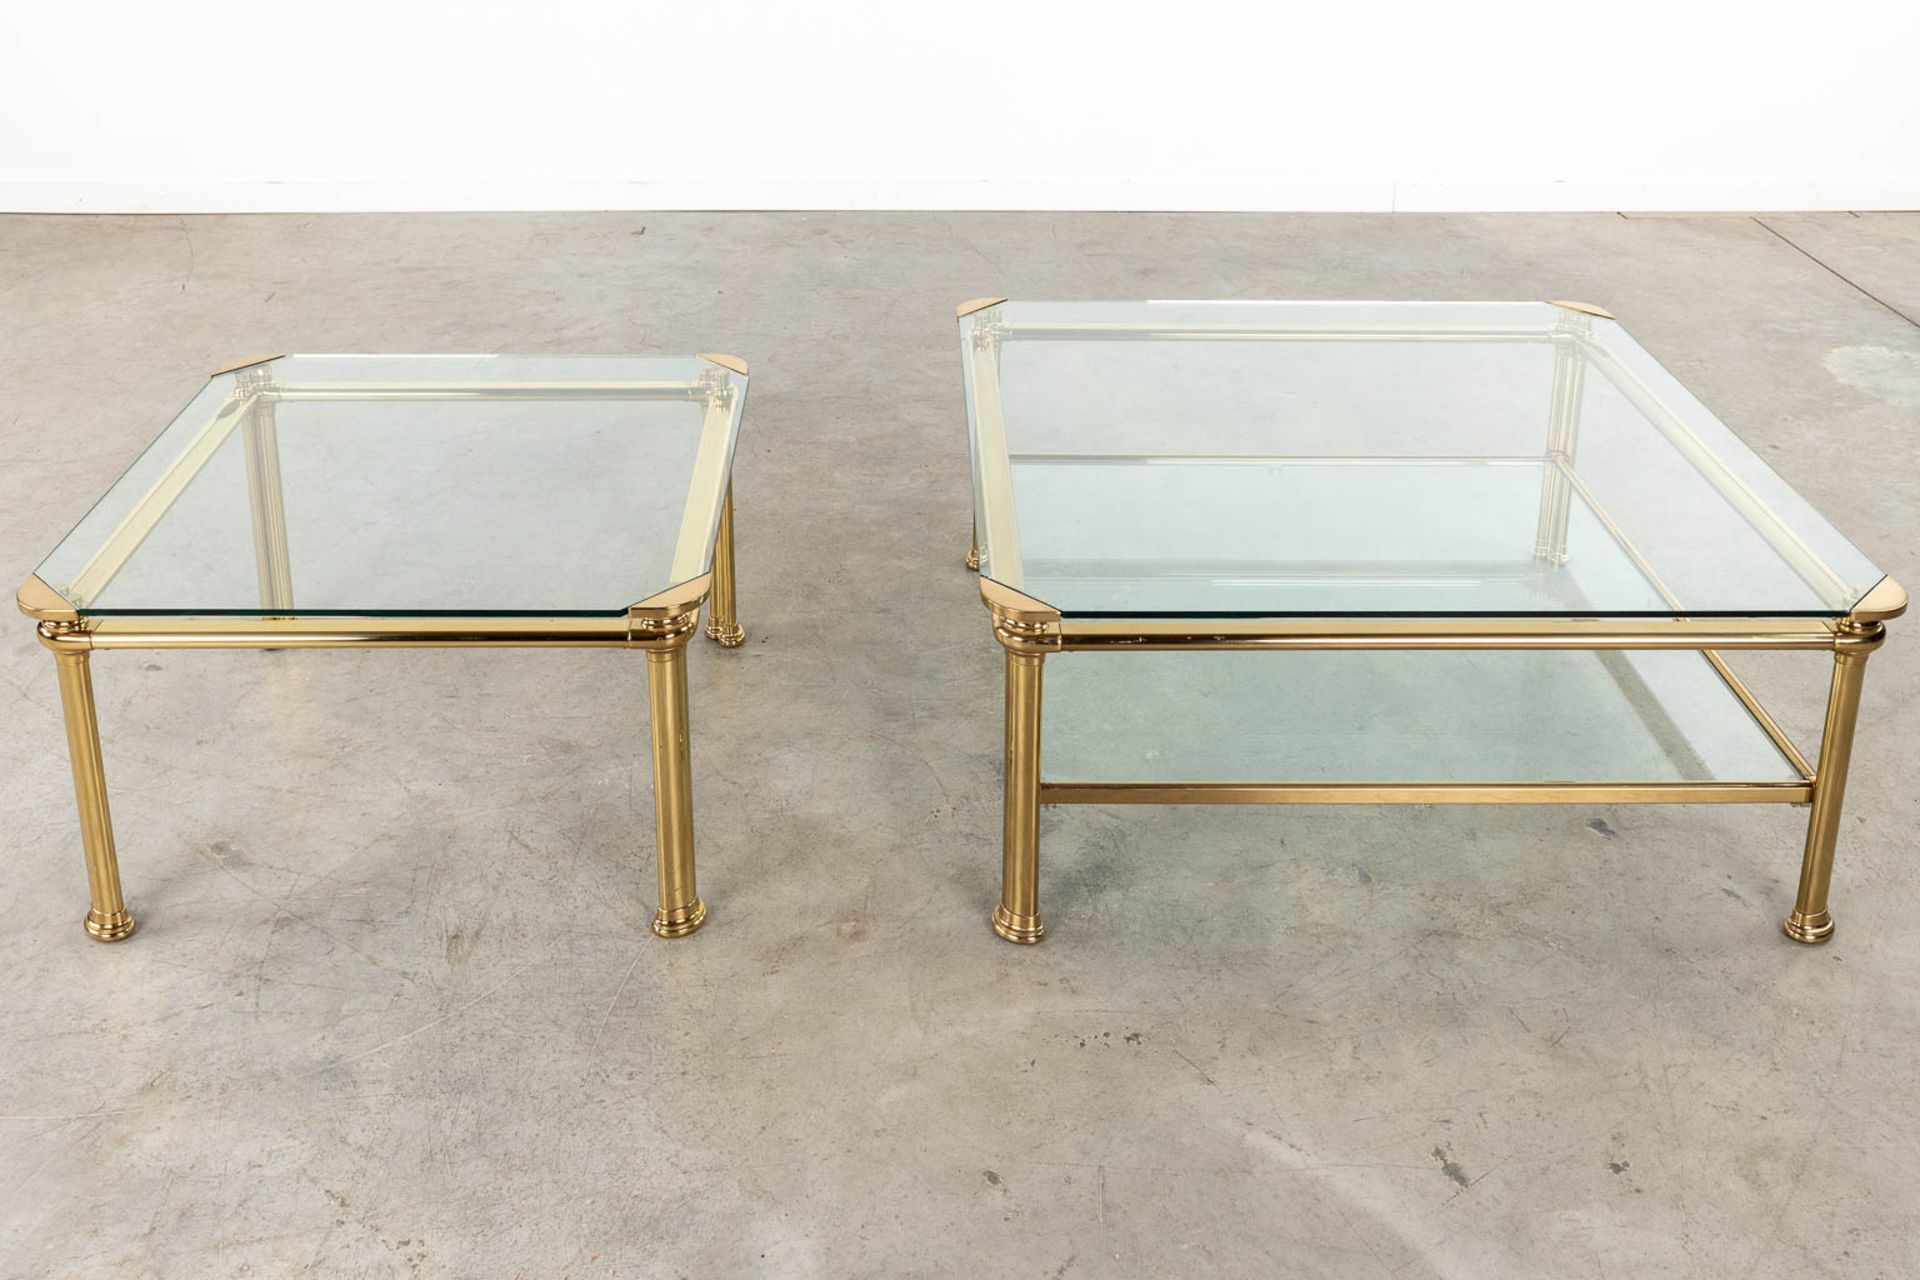 A large and small coffee table, brass and glass. Signed Mara. Circa 1980. (L:90 x W:90 x H:38 cm) - Bild 3 aus 6